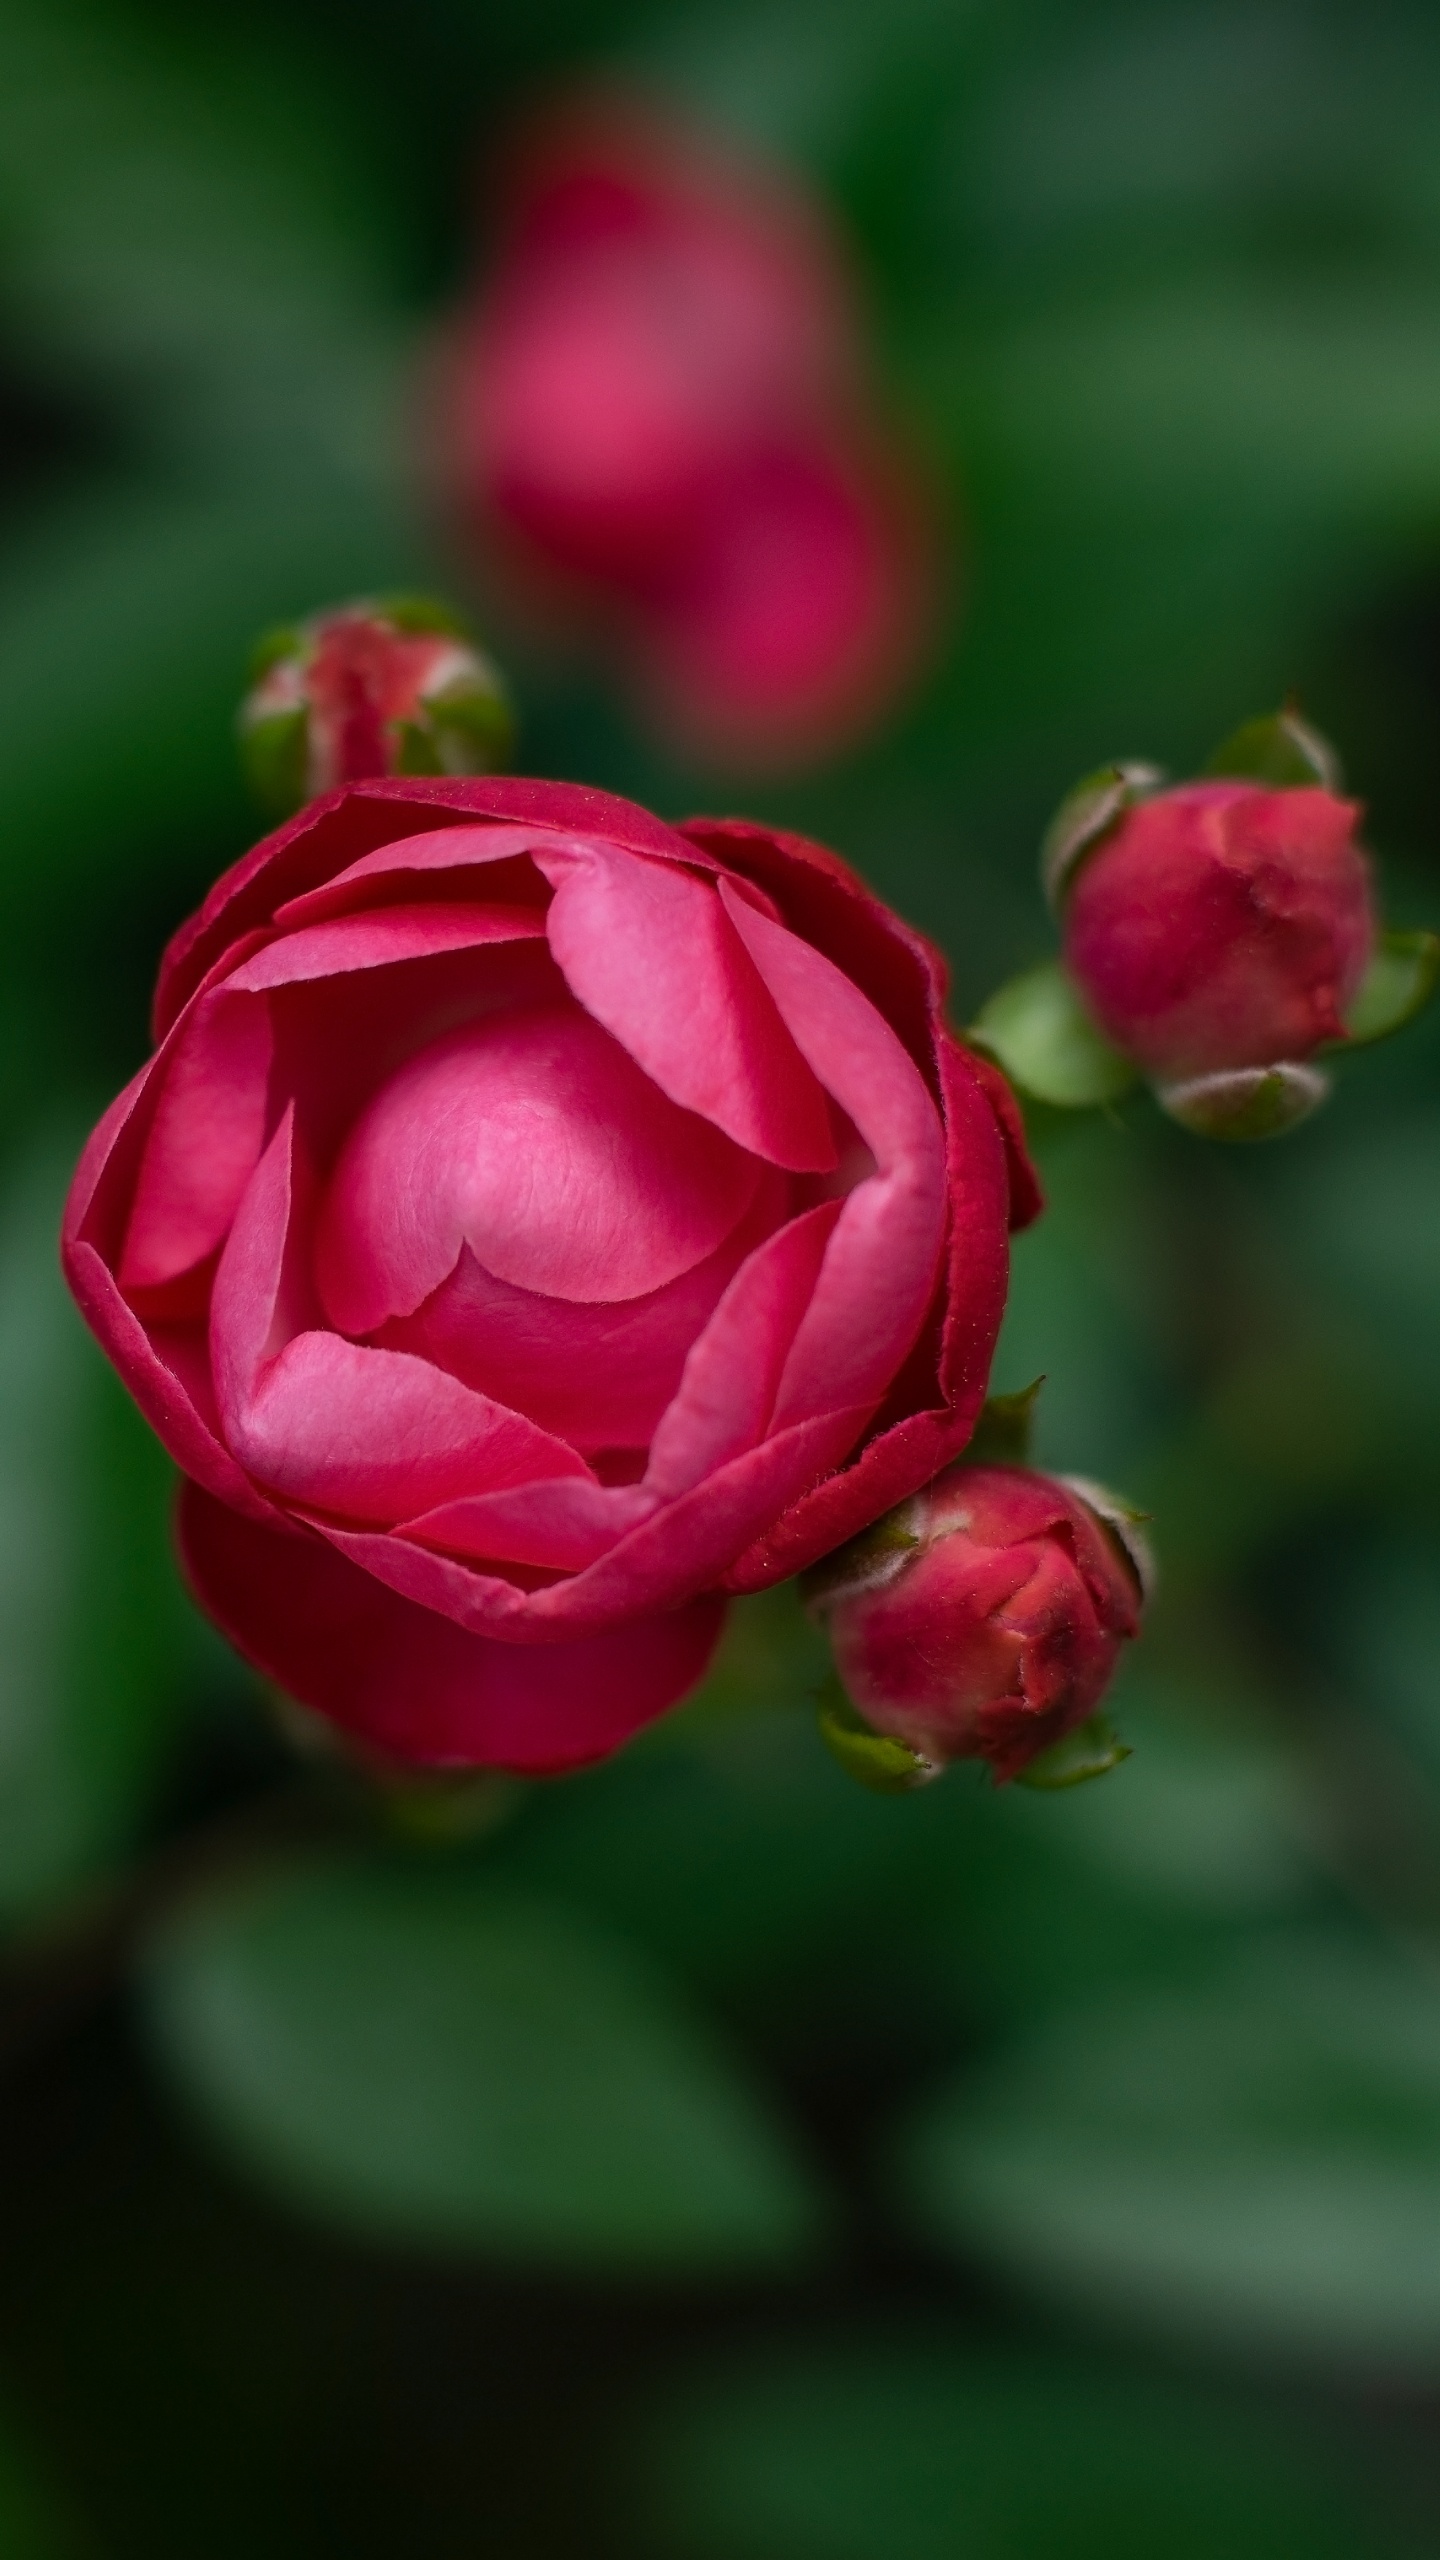 Pink Rose in Bloom During Daytime. Wallpaper in 1440x2560 Resolution